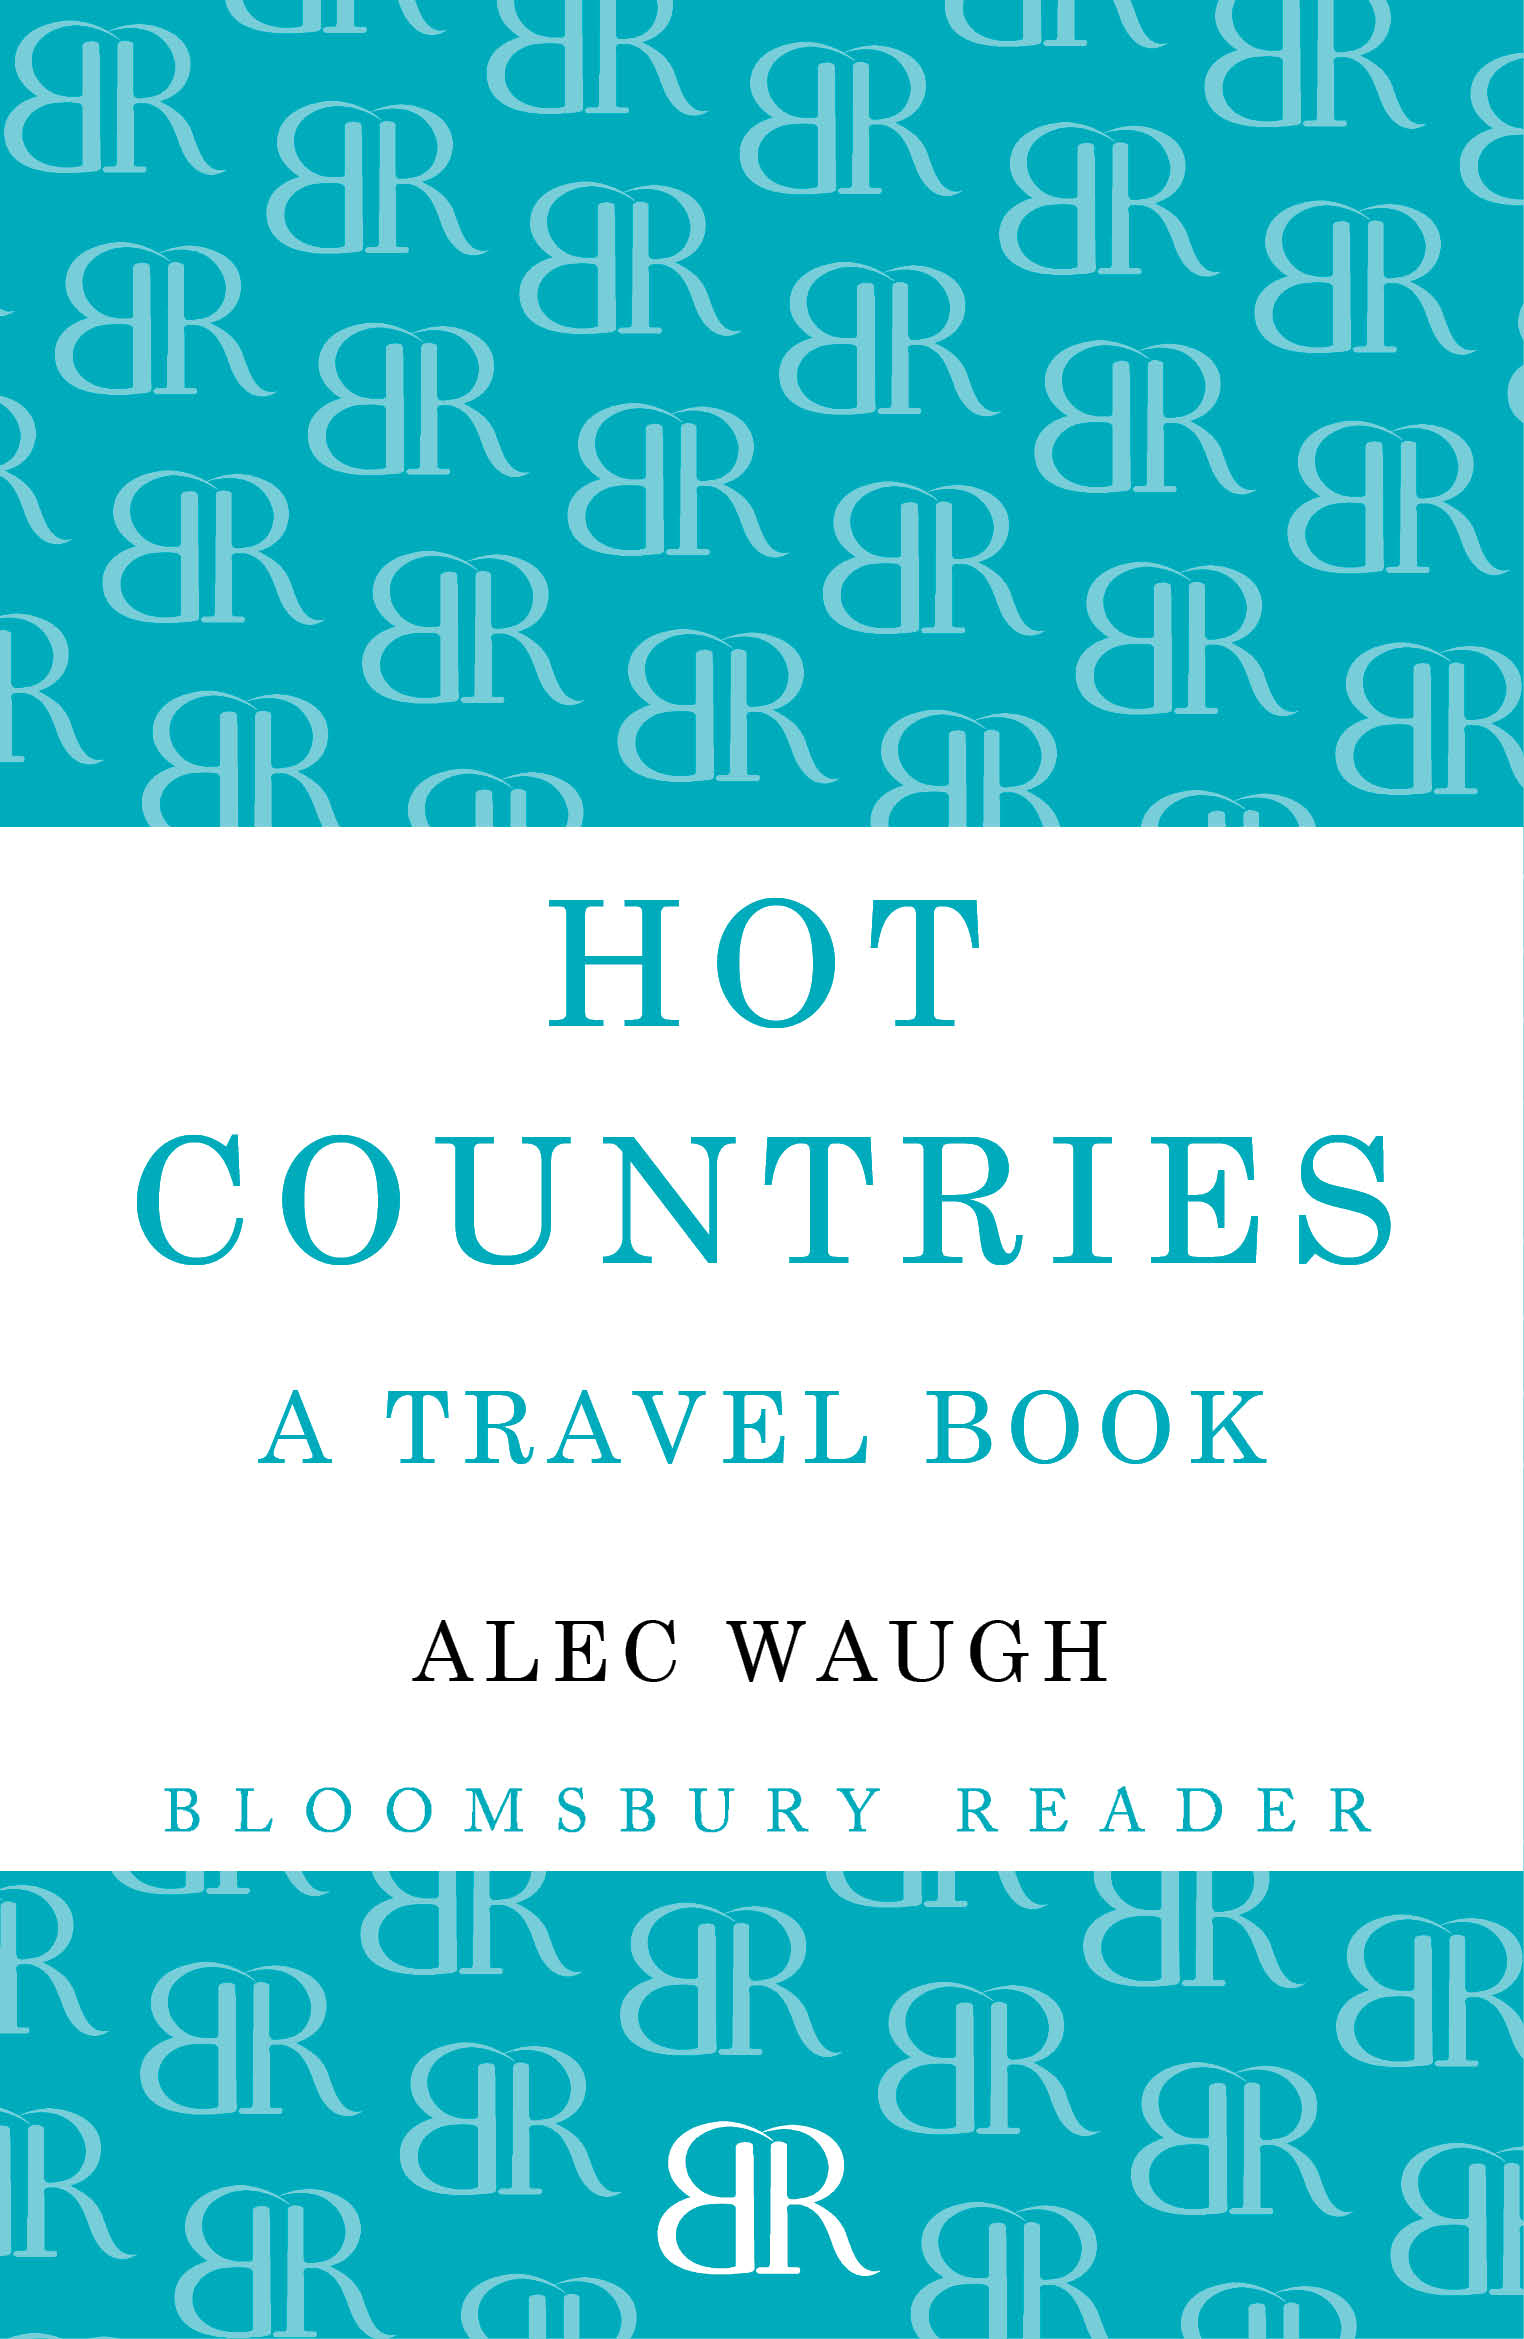 Hot Countries (1930) by Alec Waugh